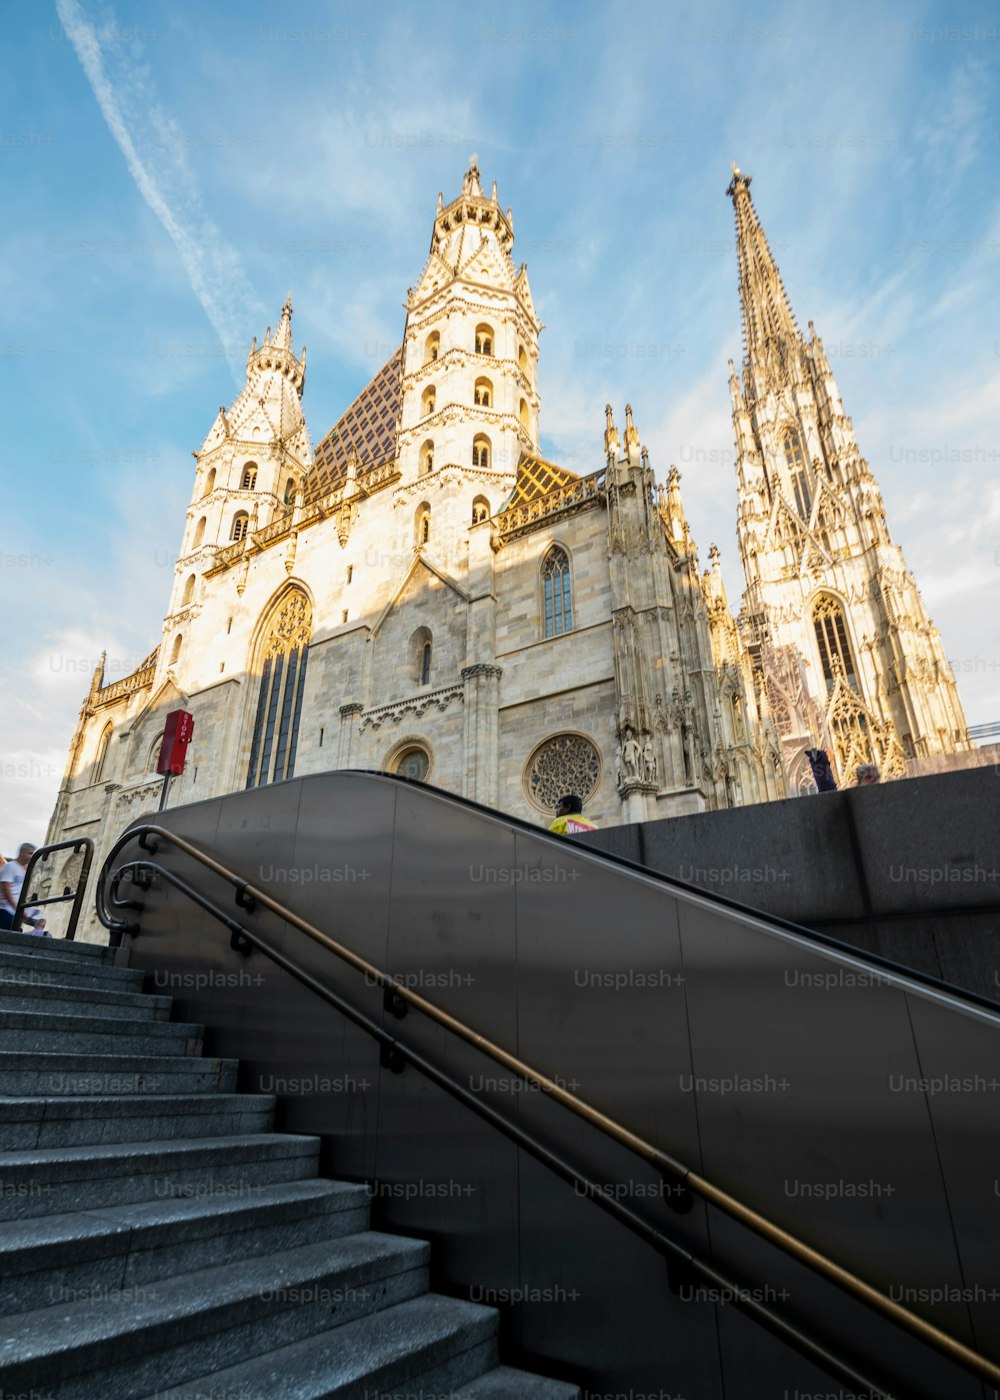 A vertical low angle shot of Saint Stephen's Cathedral in Vienna, Austria